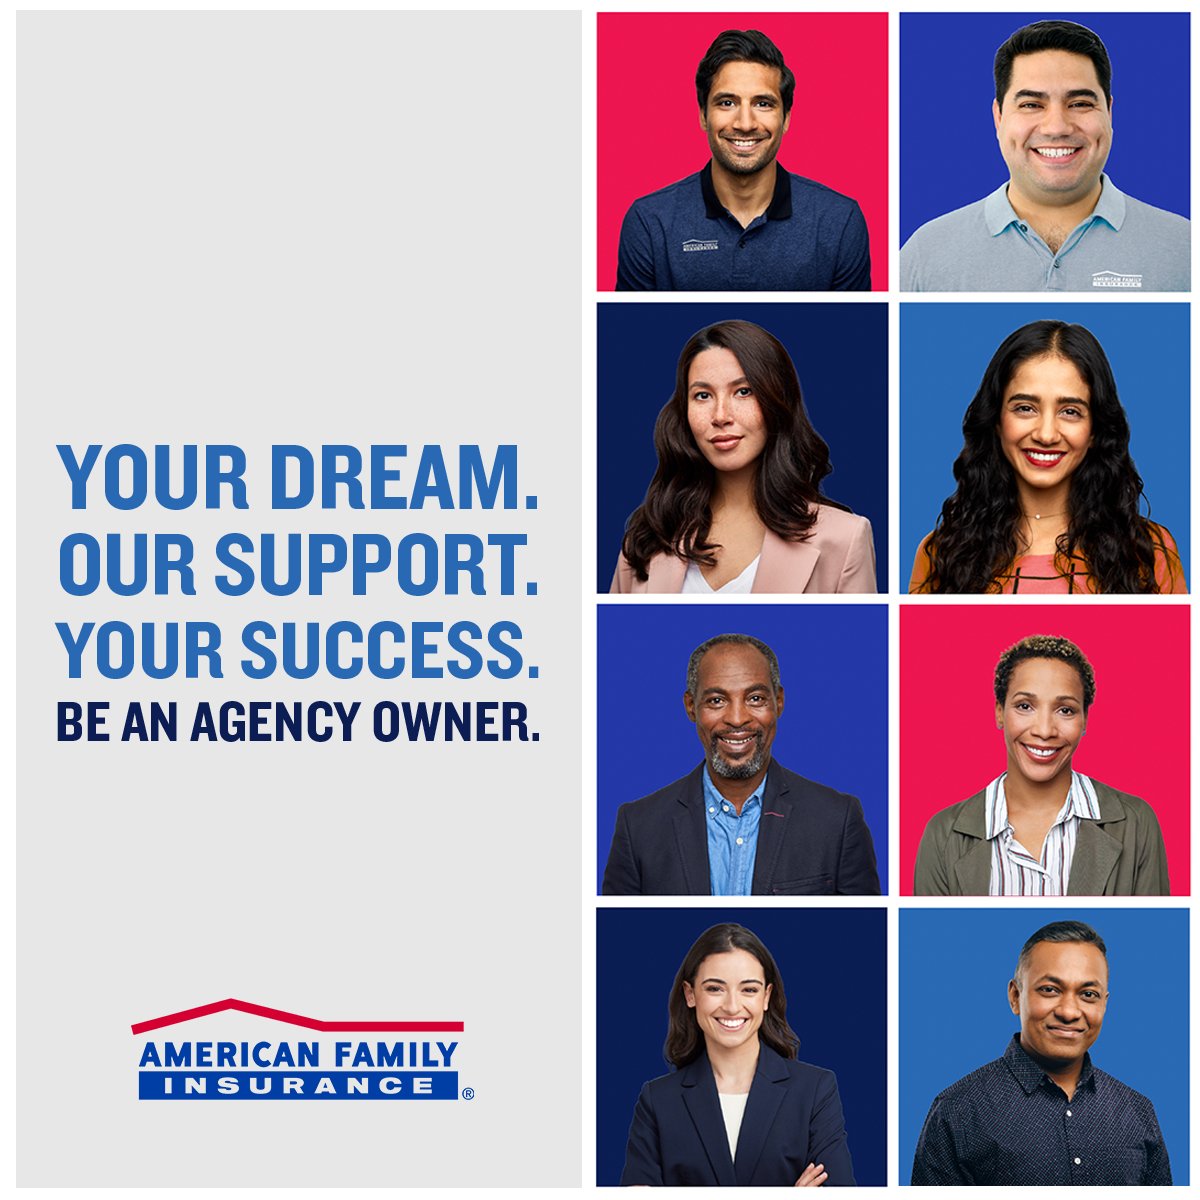 From teachers to military veterans, and every career in between, @AmFam agents come from all walks of life. Whatever your background – you can pursue the dream of owning your own agency business. Learn more. bit.ly/49XBmH8 #iWork4AmFam